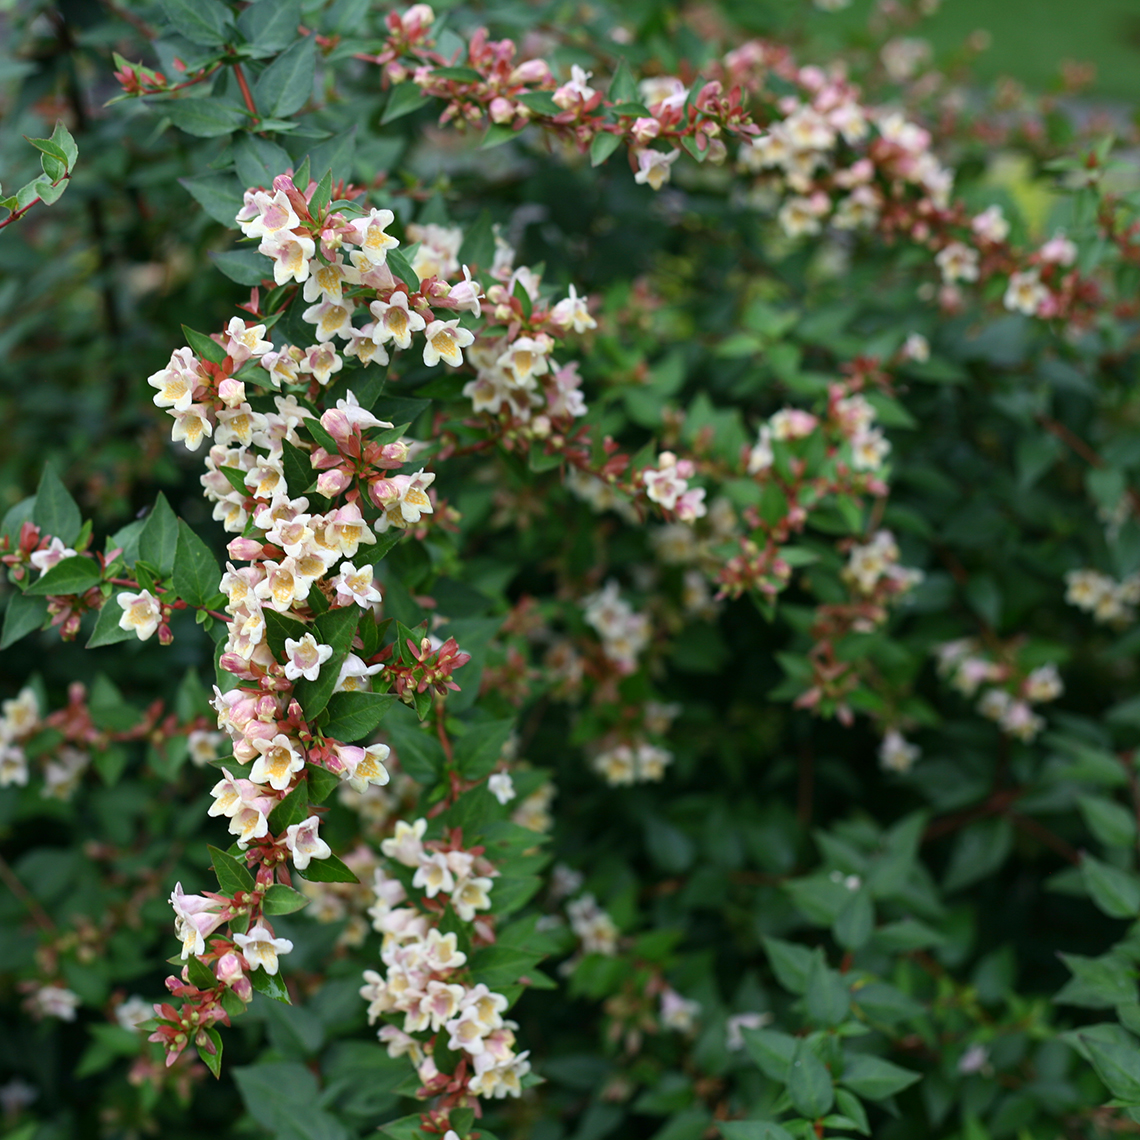 Branches of Sunny Anniversary Abelia covered in yellow blooms